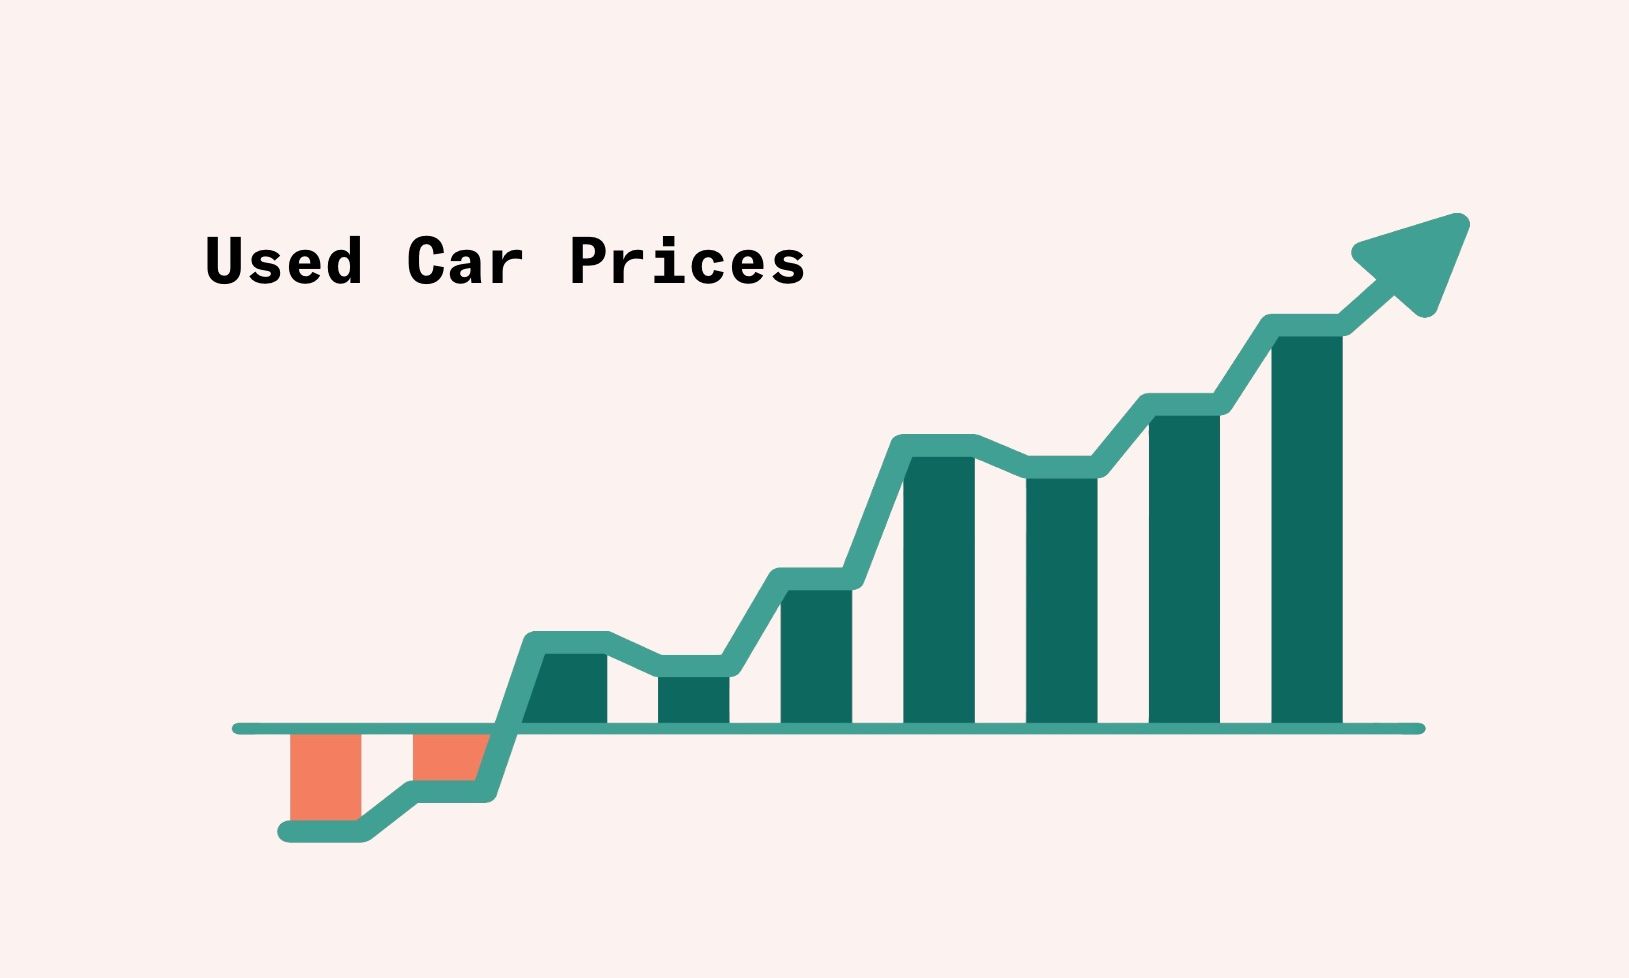 Used Car Prices Going Up But You Can Still Buy